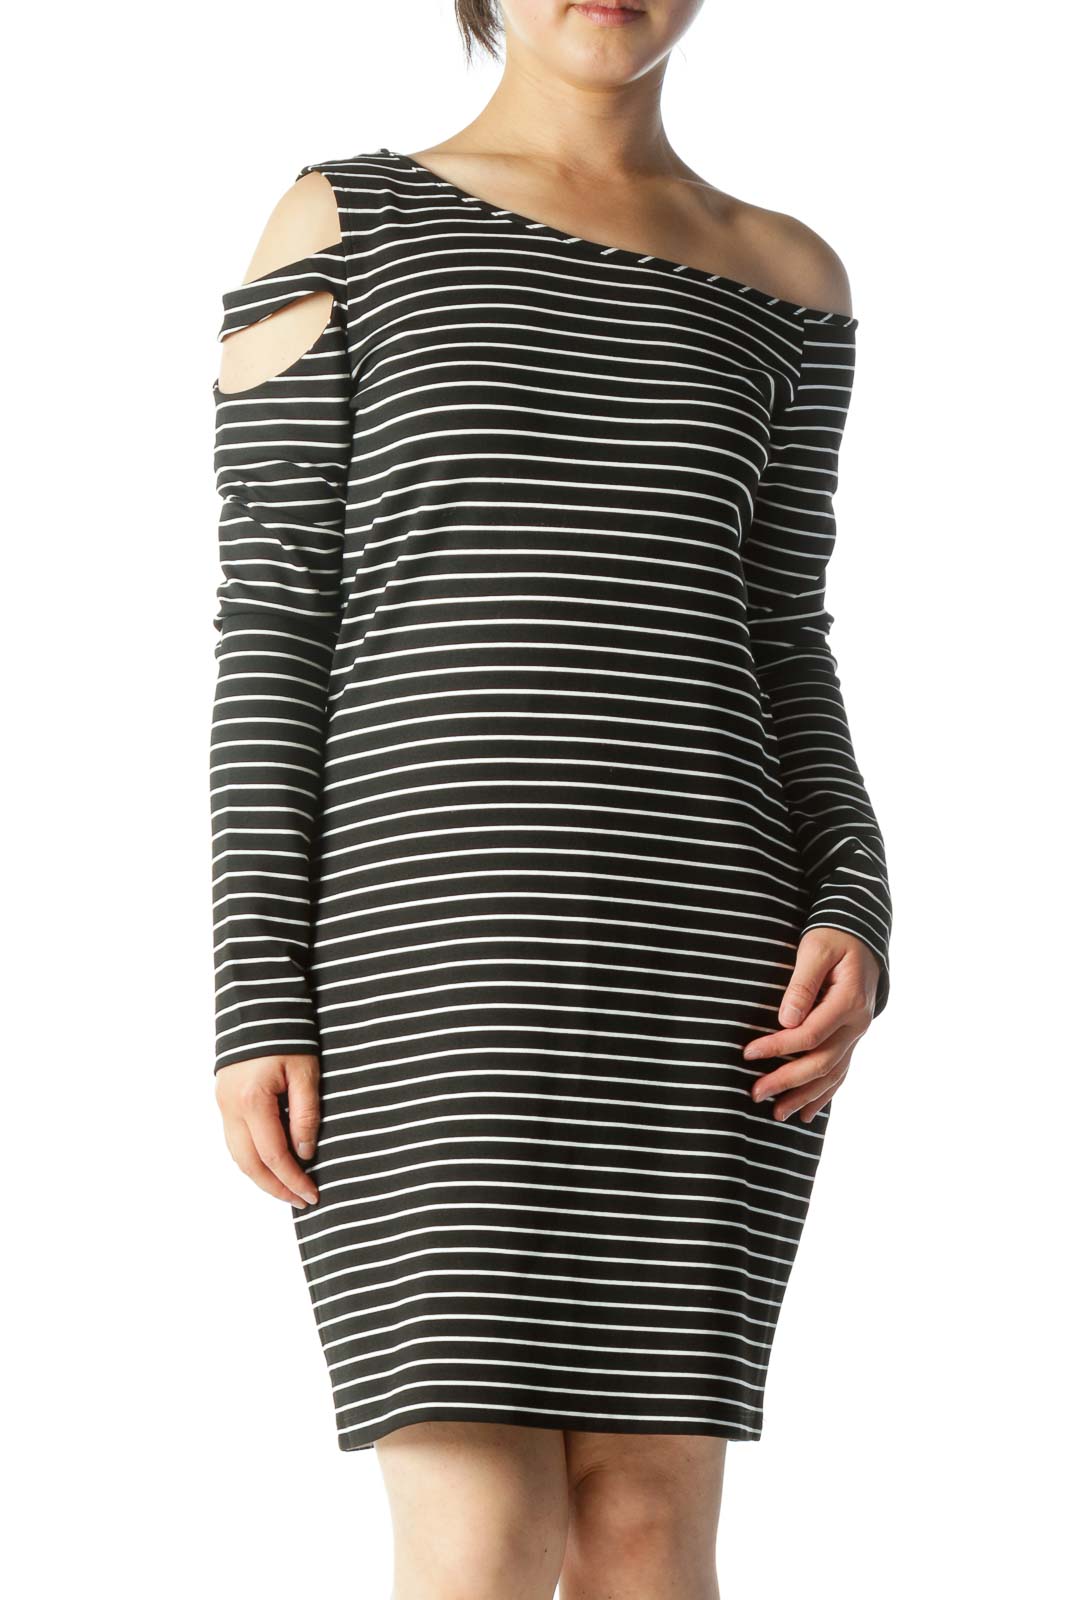 Black & White Striped Long-Sleeve Off-Shoulder Cut-Out Knit Dress Front